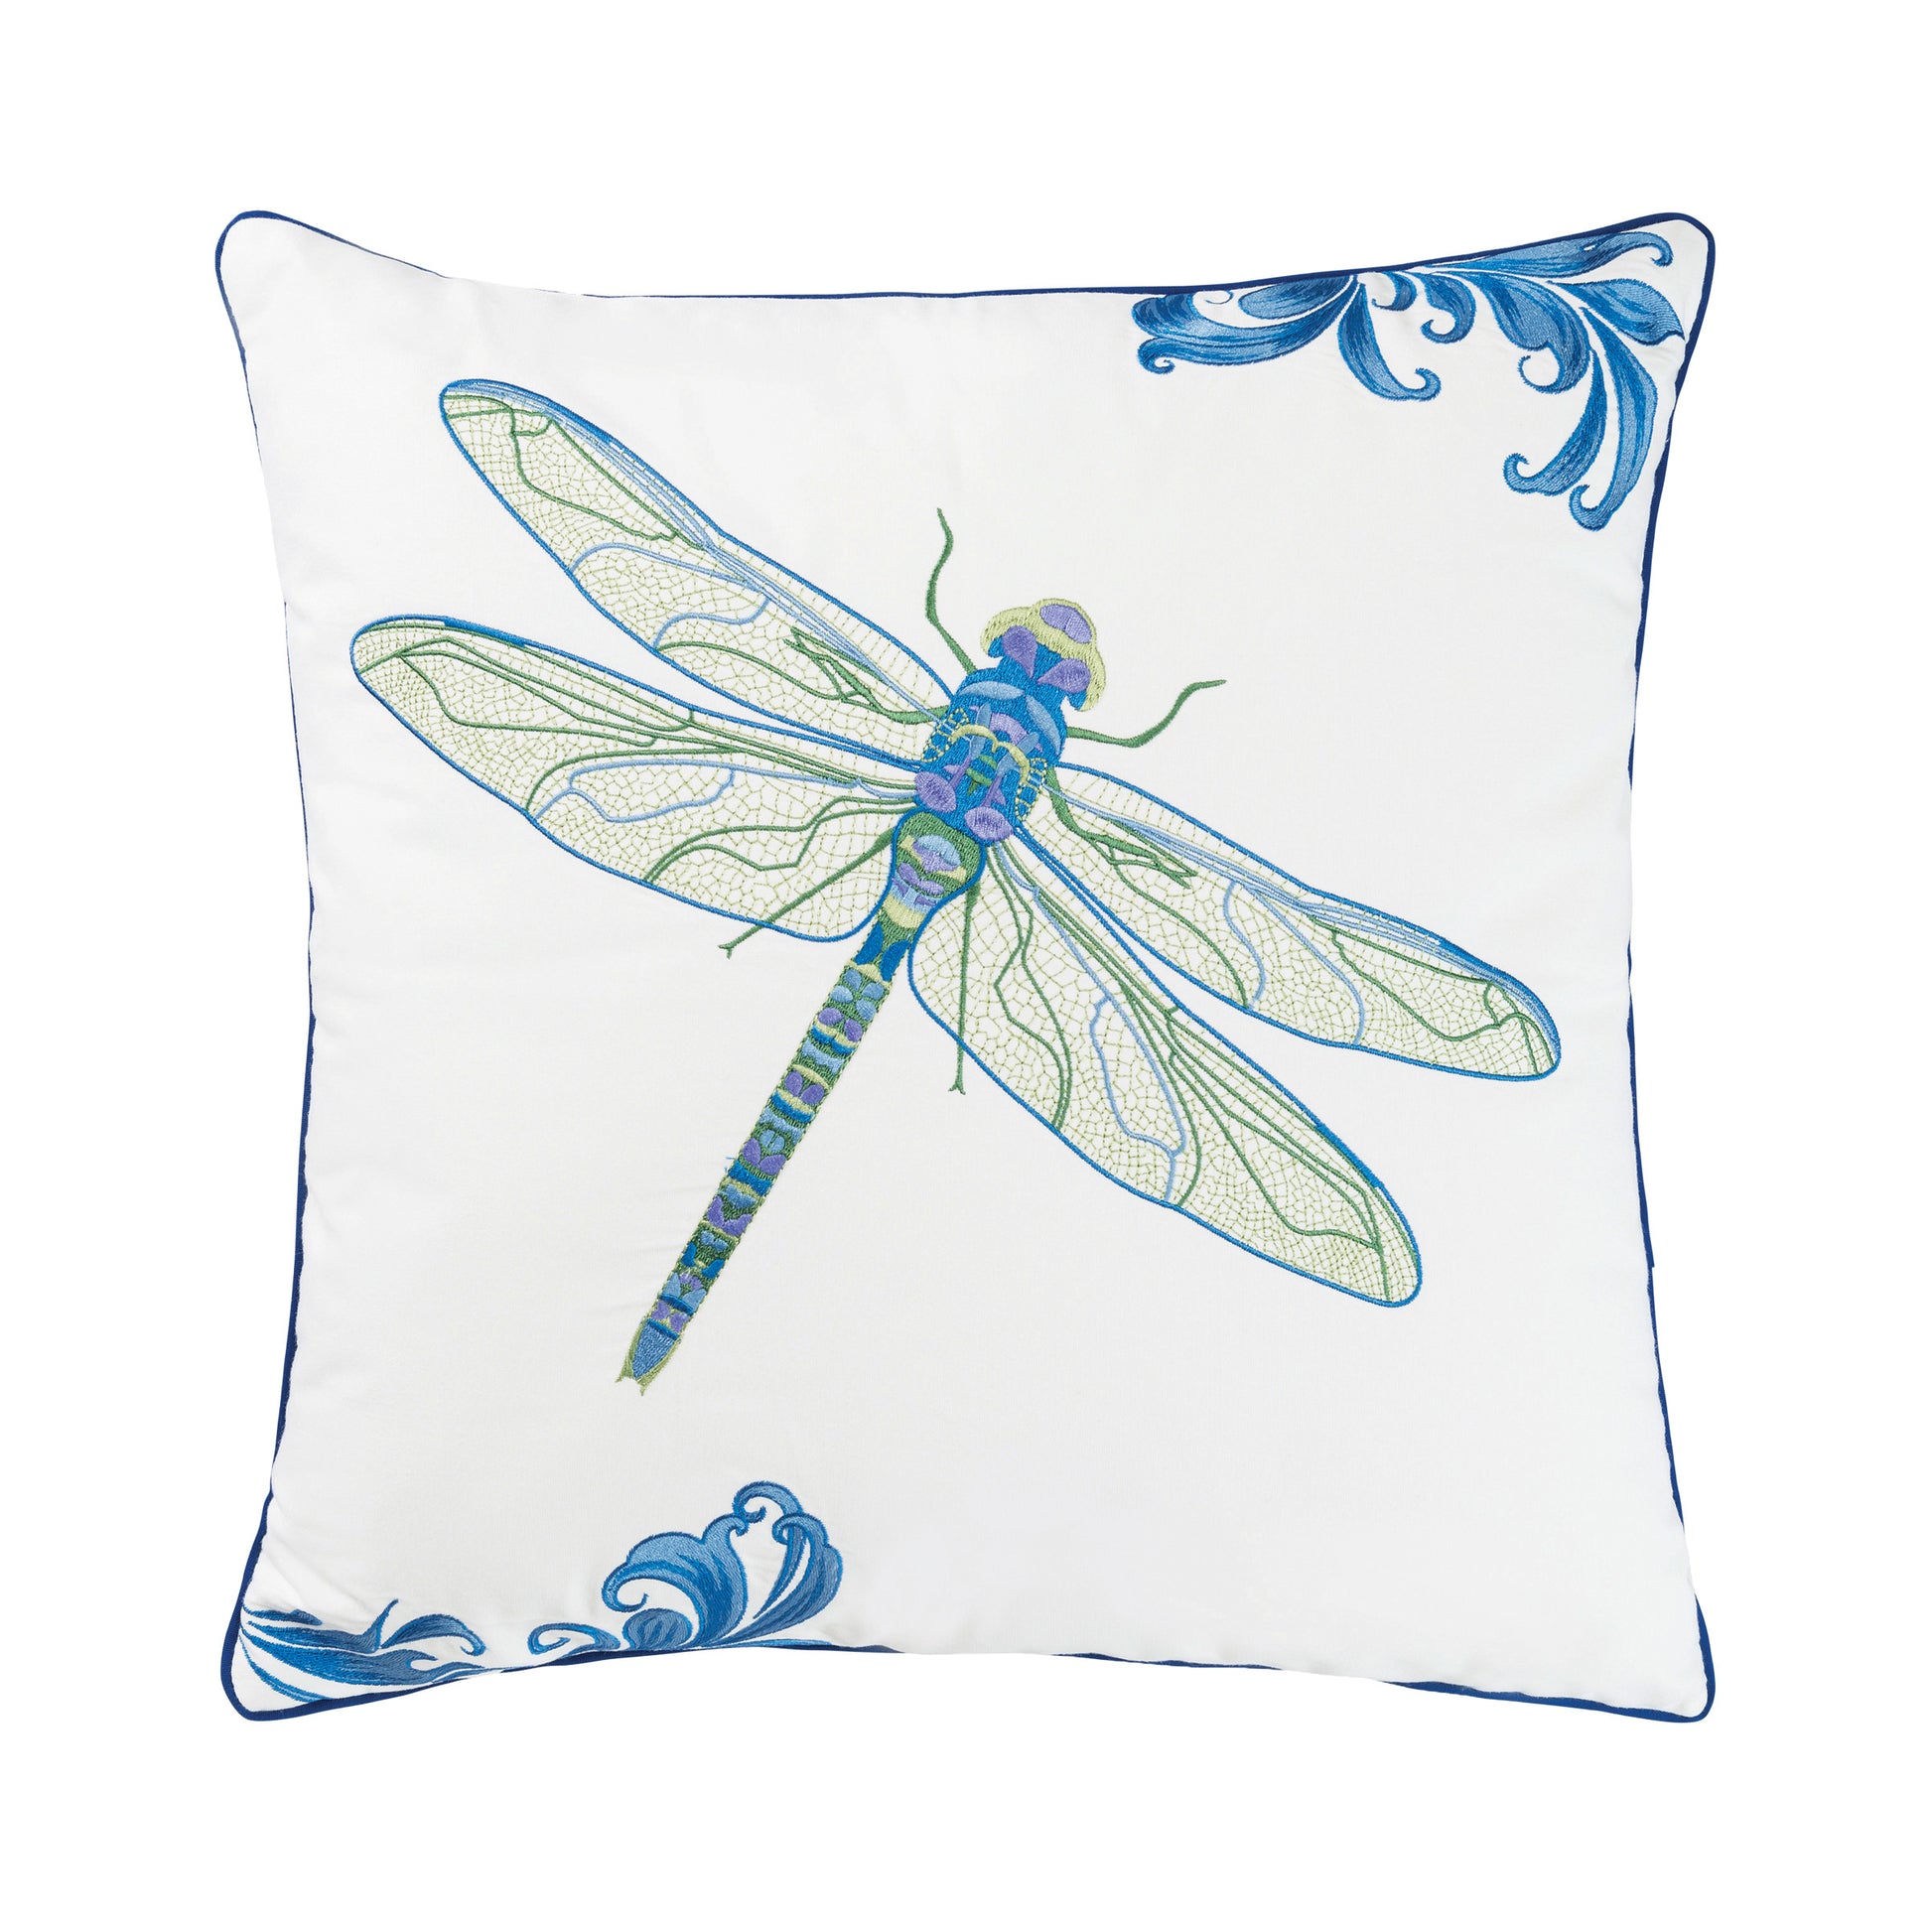 Embroidered blue, purple, and green dragonfly on a white ground outdoor pillow. Blue scroll accents in top right & bottom left corner and blue piped edges.